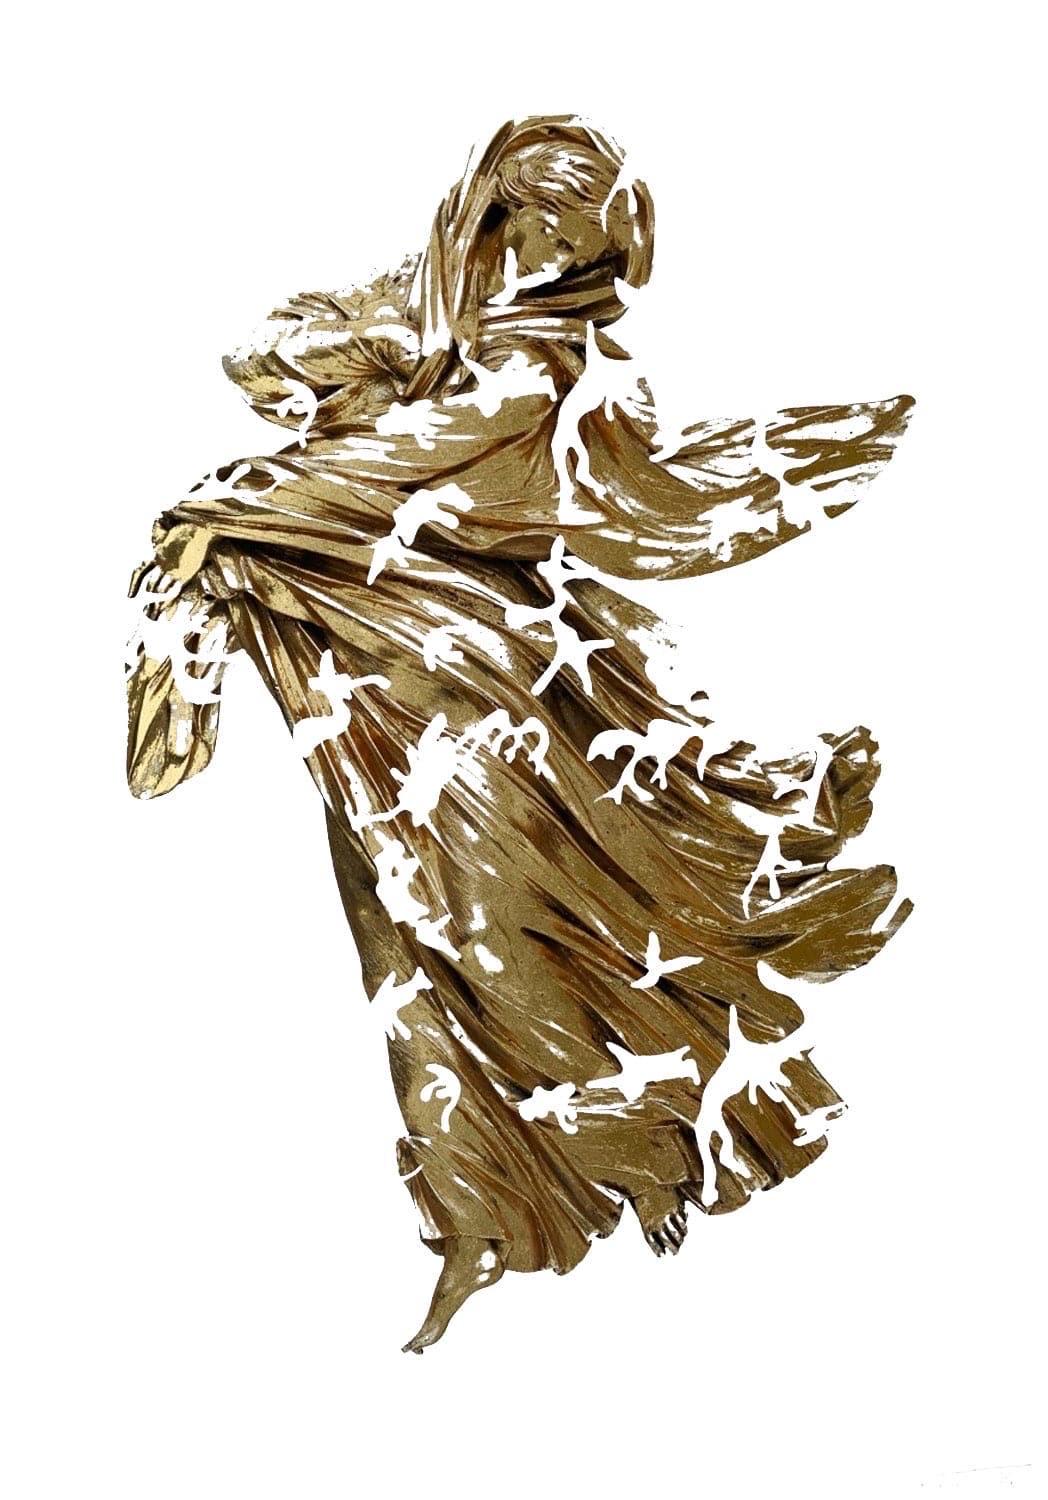 Magnus Gjoen, THE DANCER, 2022

Print of Magnus Gjoen's THE DANCER, originally on plywood.

Produced using archival pigment inks and 24ct gold leaf, printed on cotton rag paper. Part of an edition of 10.

110 x 75 cm 

